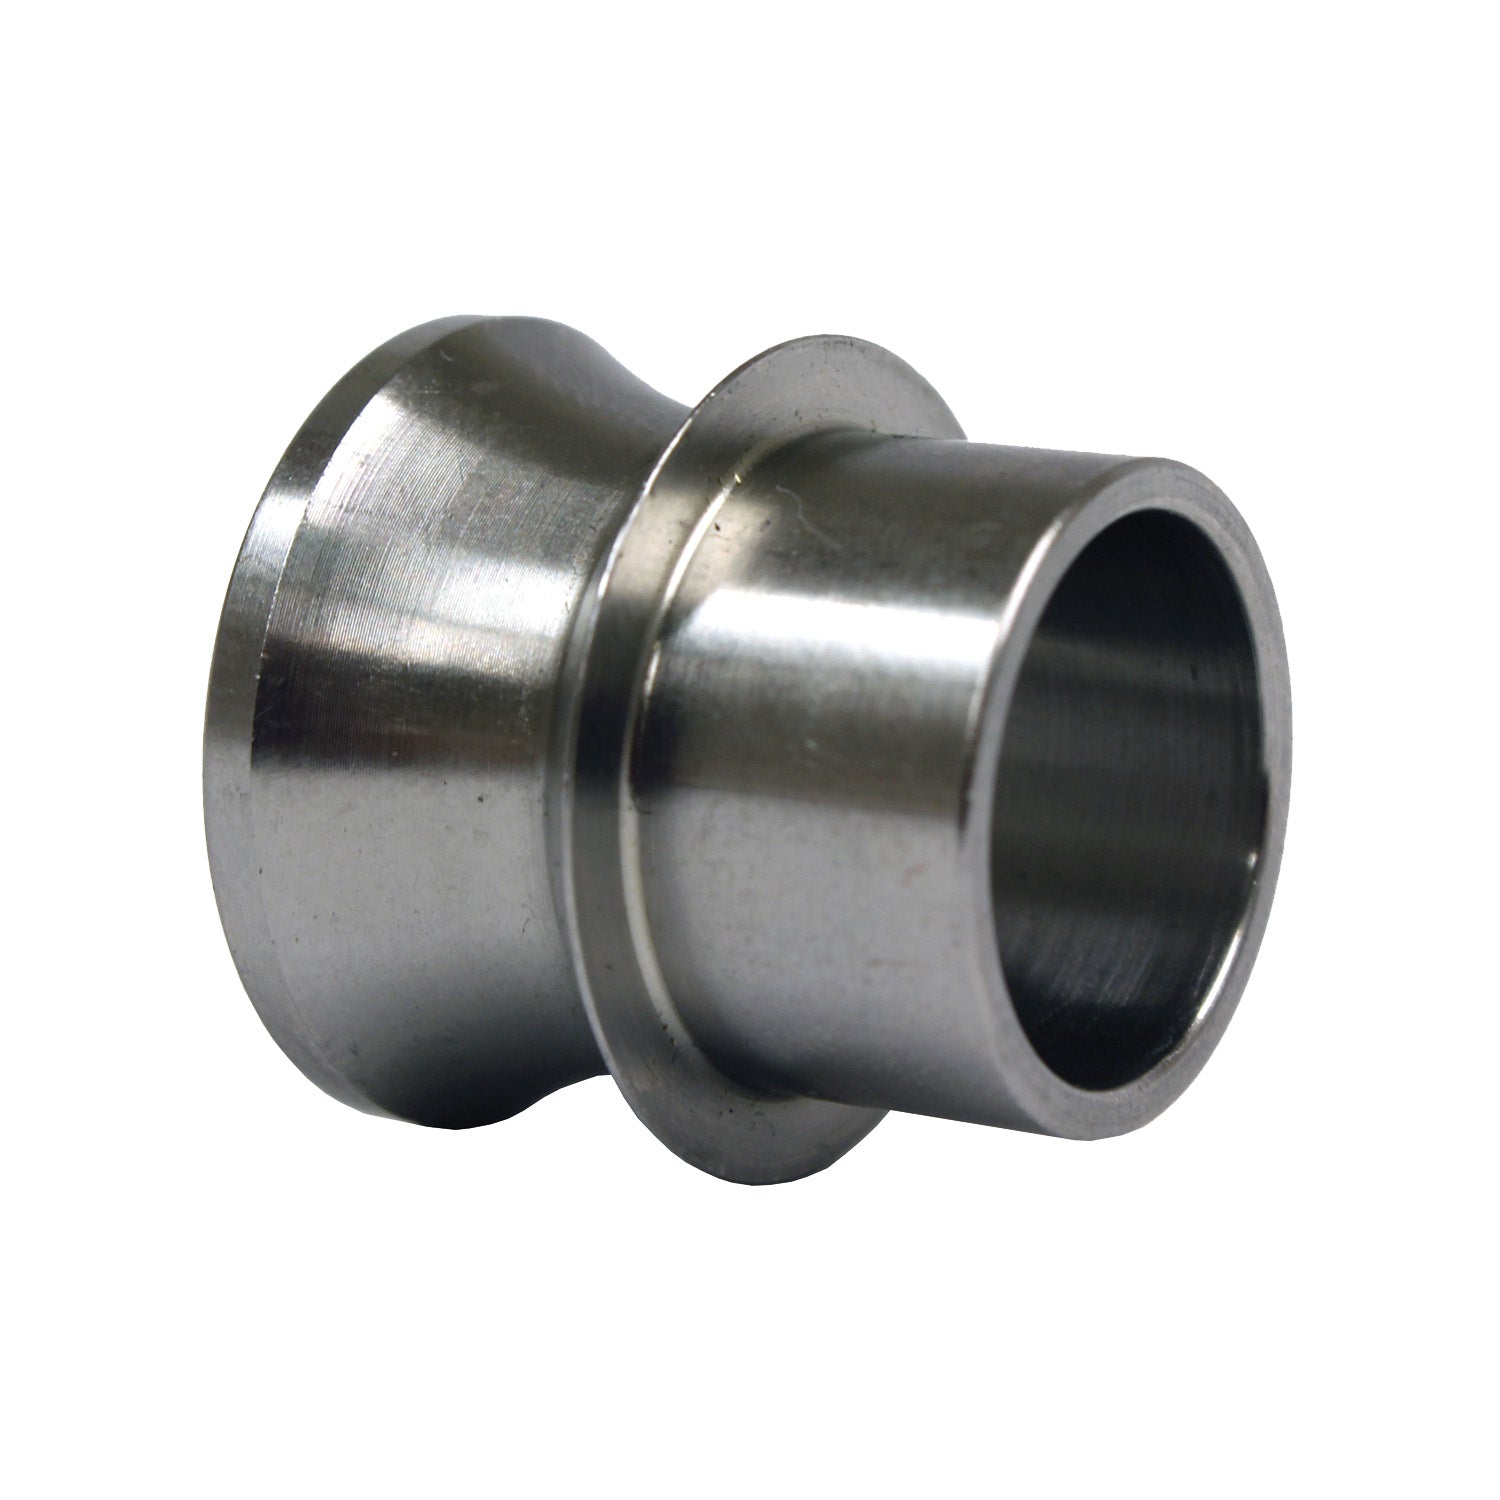 QA1 SN24-1017-H High Misalignment Spacer, 1.5 inch Od Ss, .625 inch X 3.5 inch Total Width